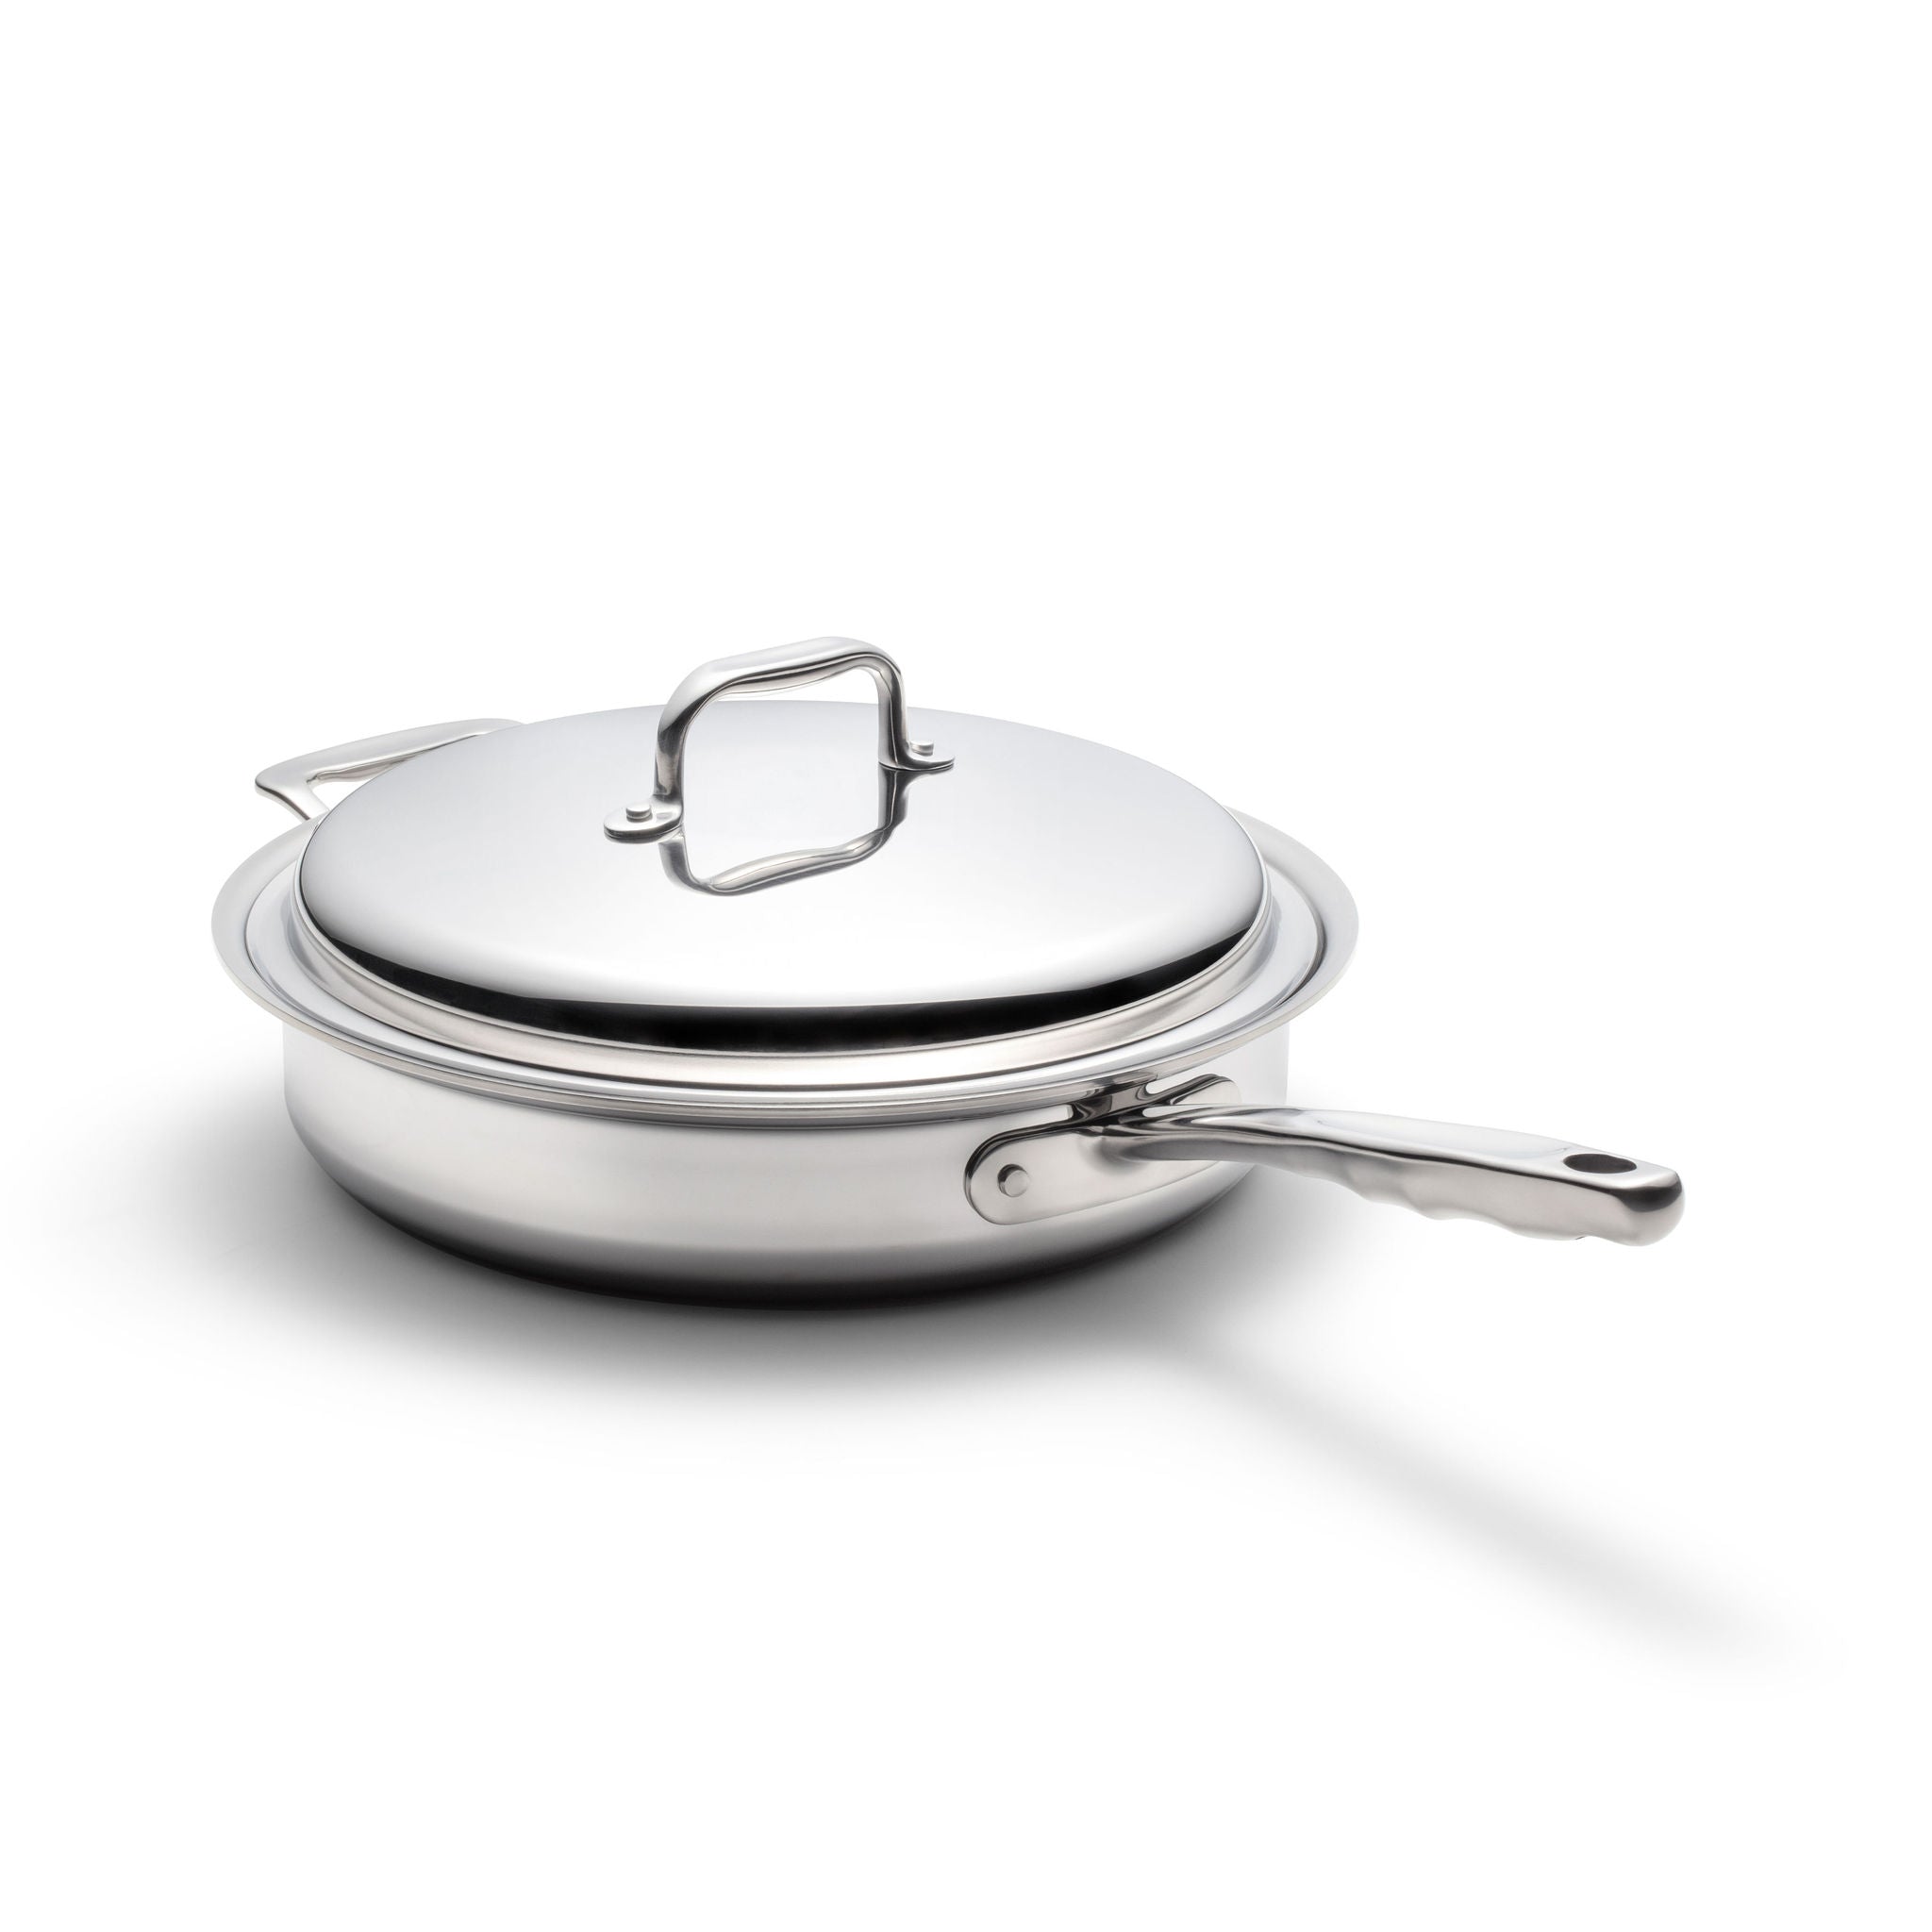 360 Cookware Stainless Steel 3 Quart Saucepan With Cover 